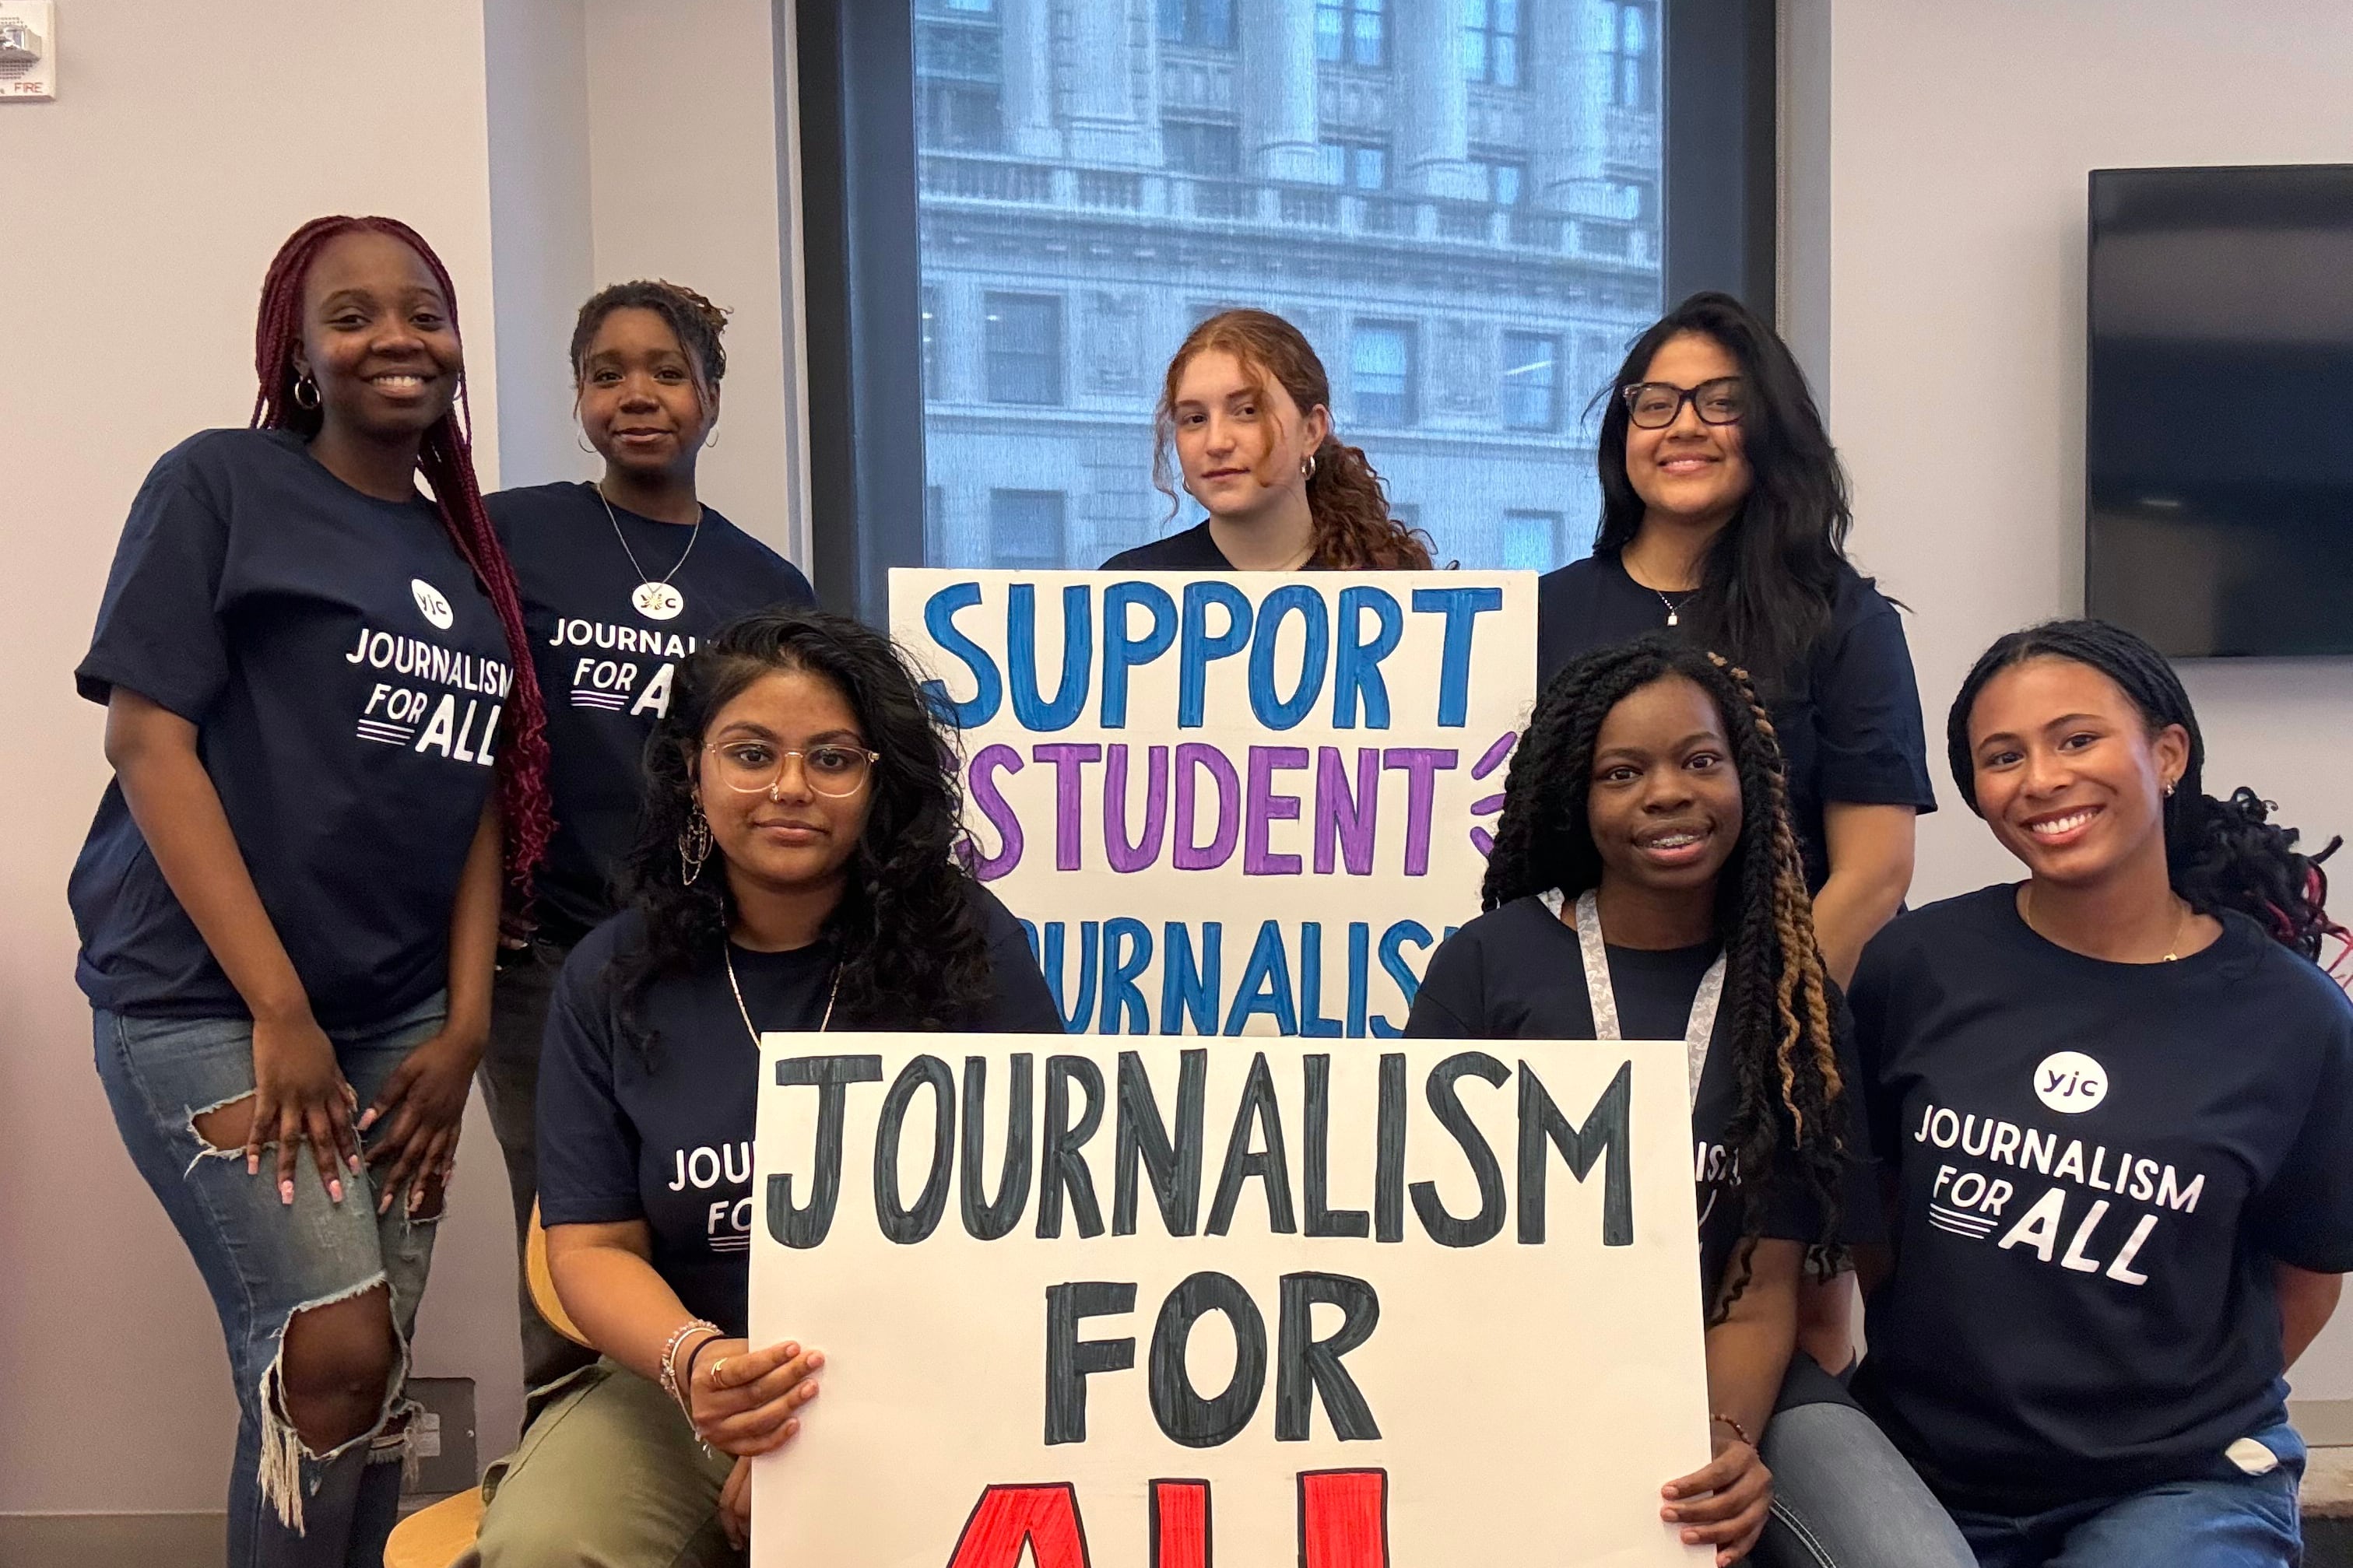 A group of young journalists wearing matching blue shirts pose for a photograph standing around two signs, one reads "Journalism for All," and Support Student Journalists."